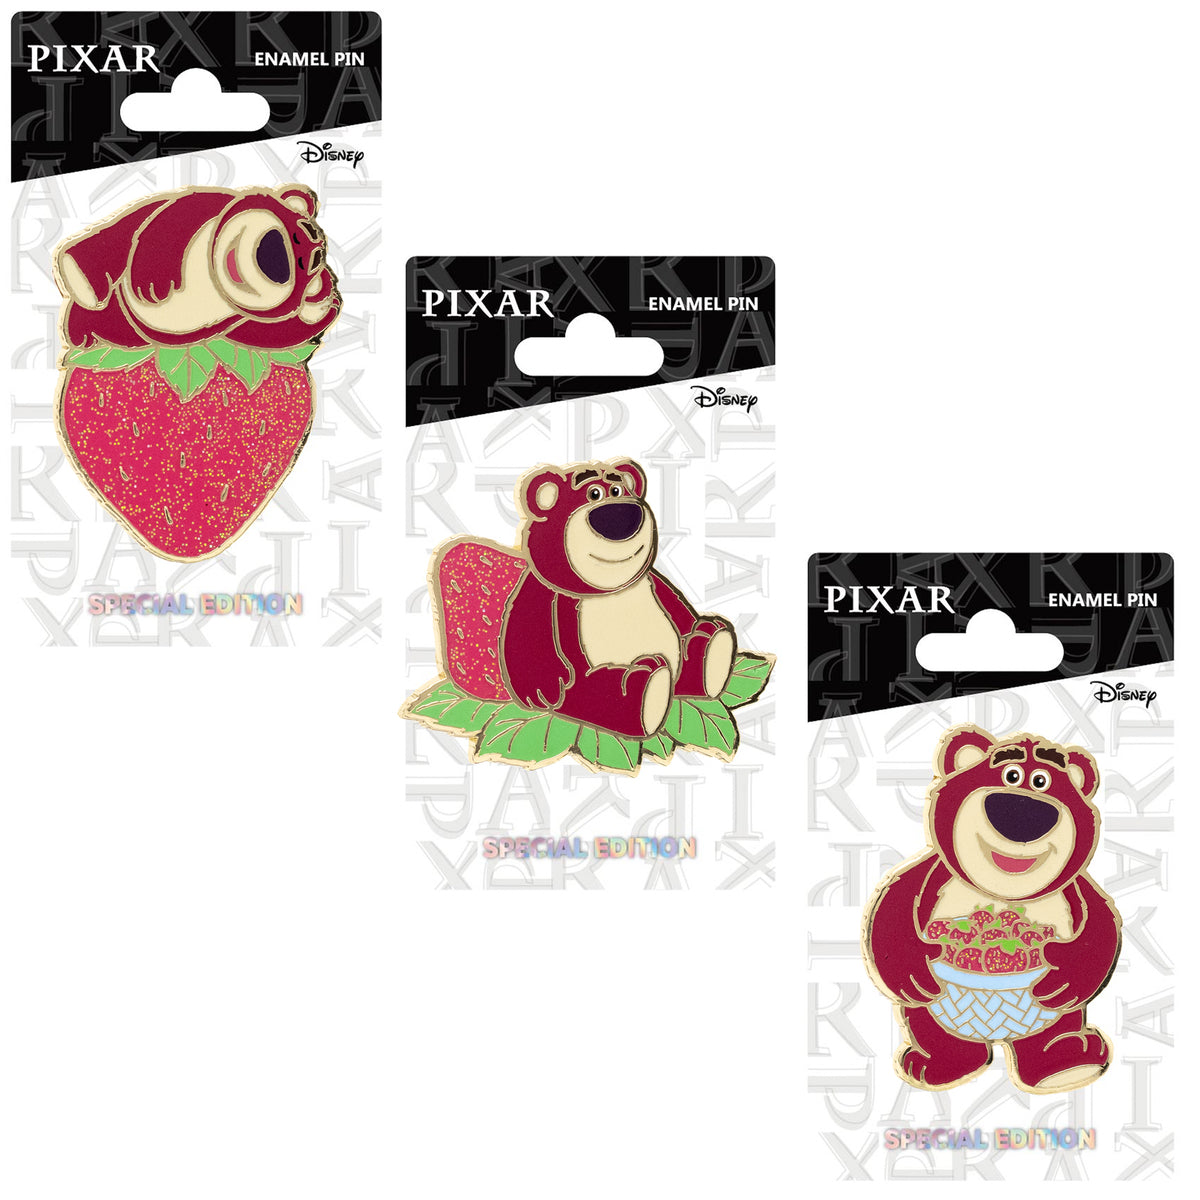 Disney Pixar Lotso with Strawberries Series Special Edition 300 Pin - NEW RELEASE